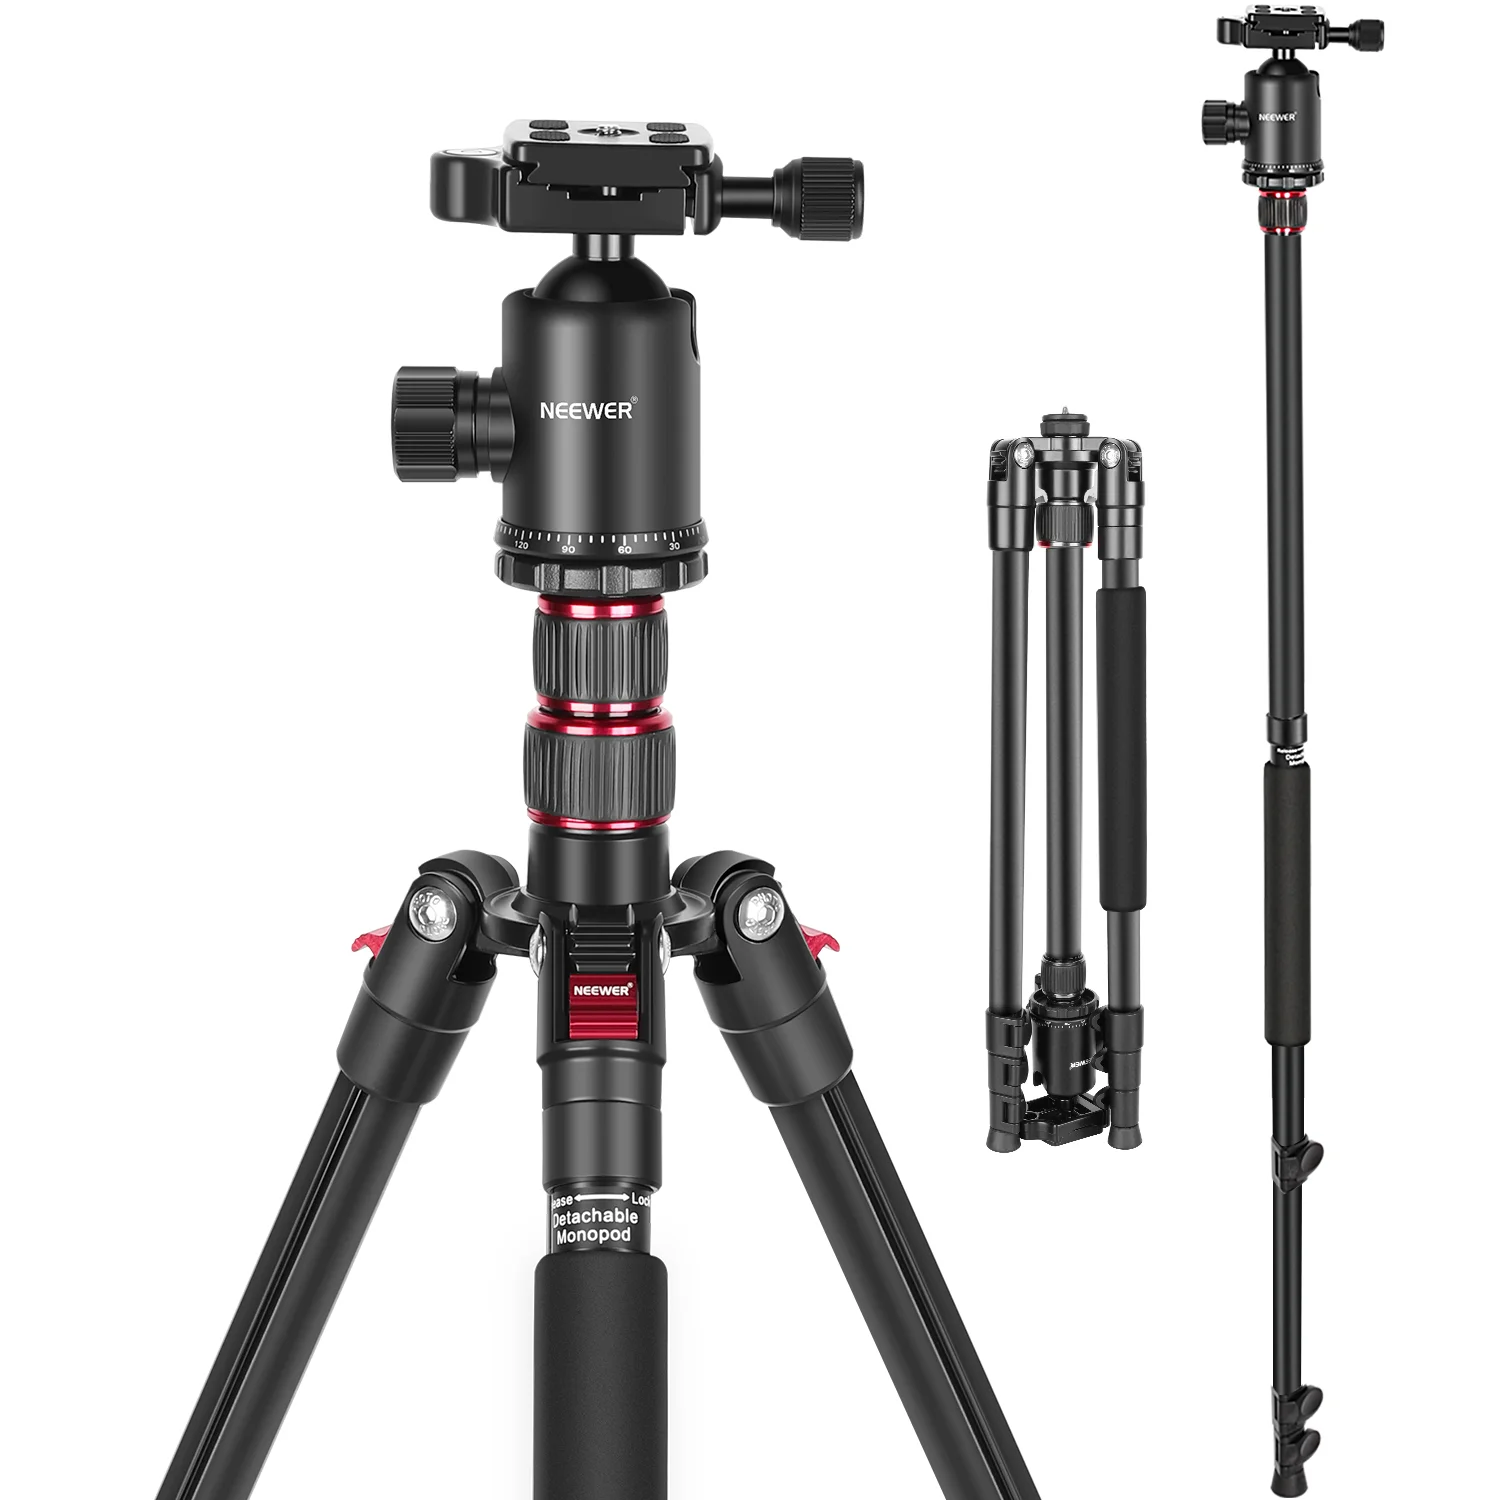 Neewer 77-Inch Tripod, Camera Tripod for DSLR, 2-in-1 Compact Aluminum Tripod Monopod with 360 Degree Ball Head, 2 Center Axis